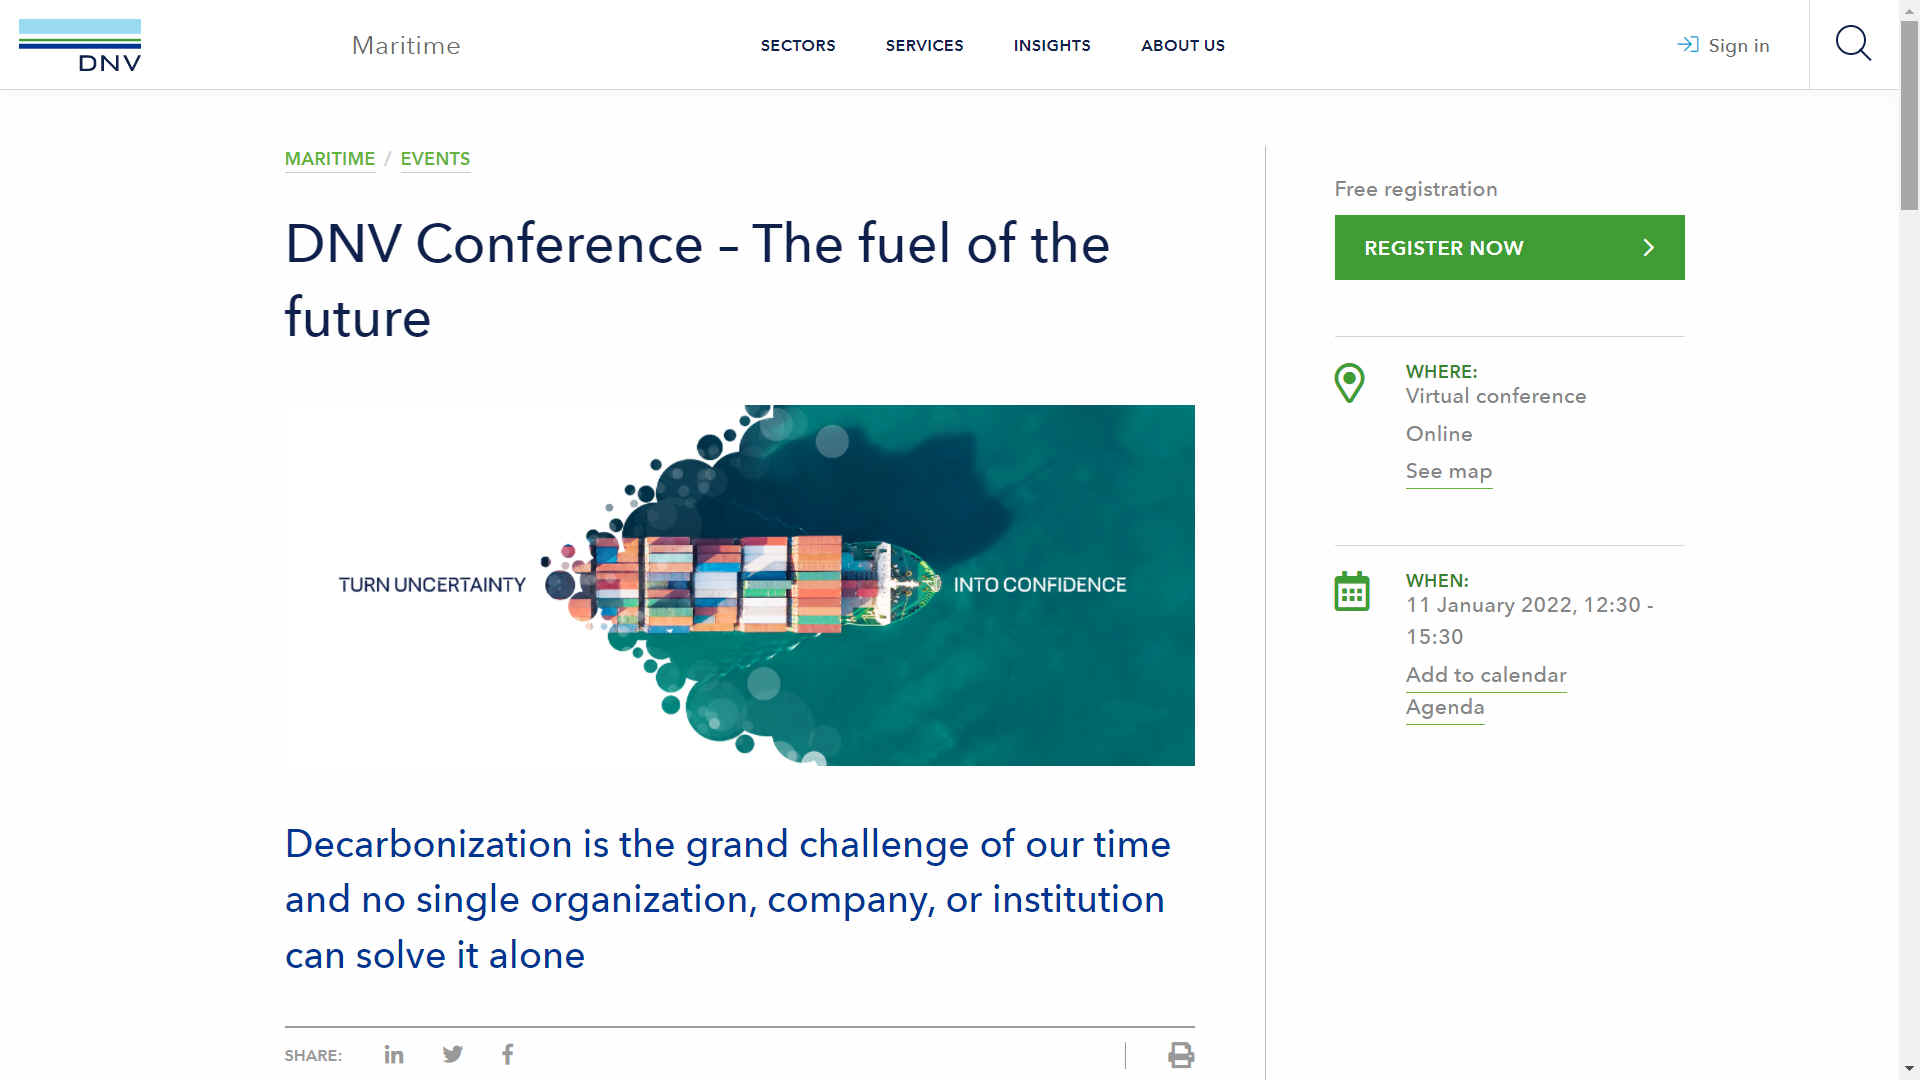 DNV Conference - The fuel of the future, January 2022